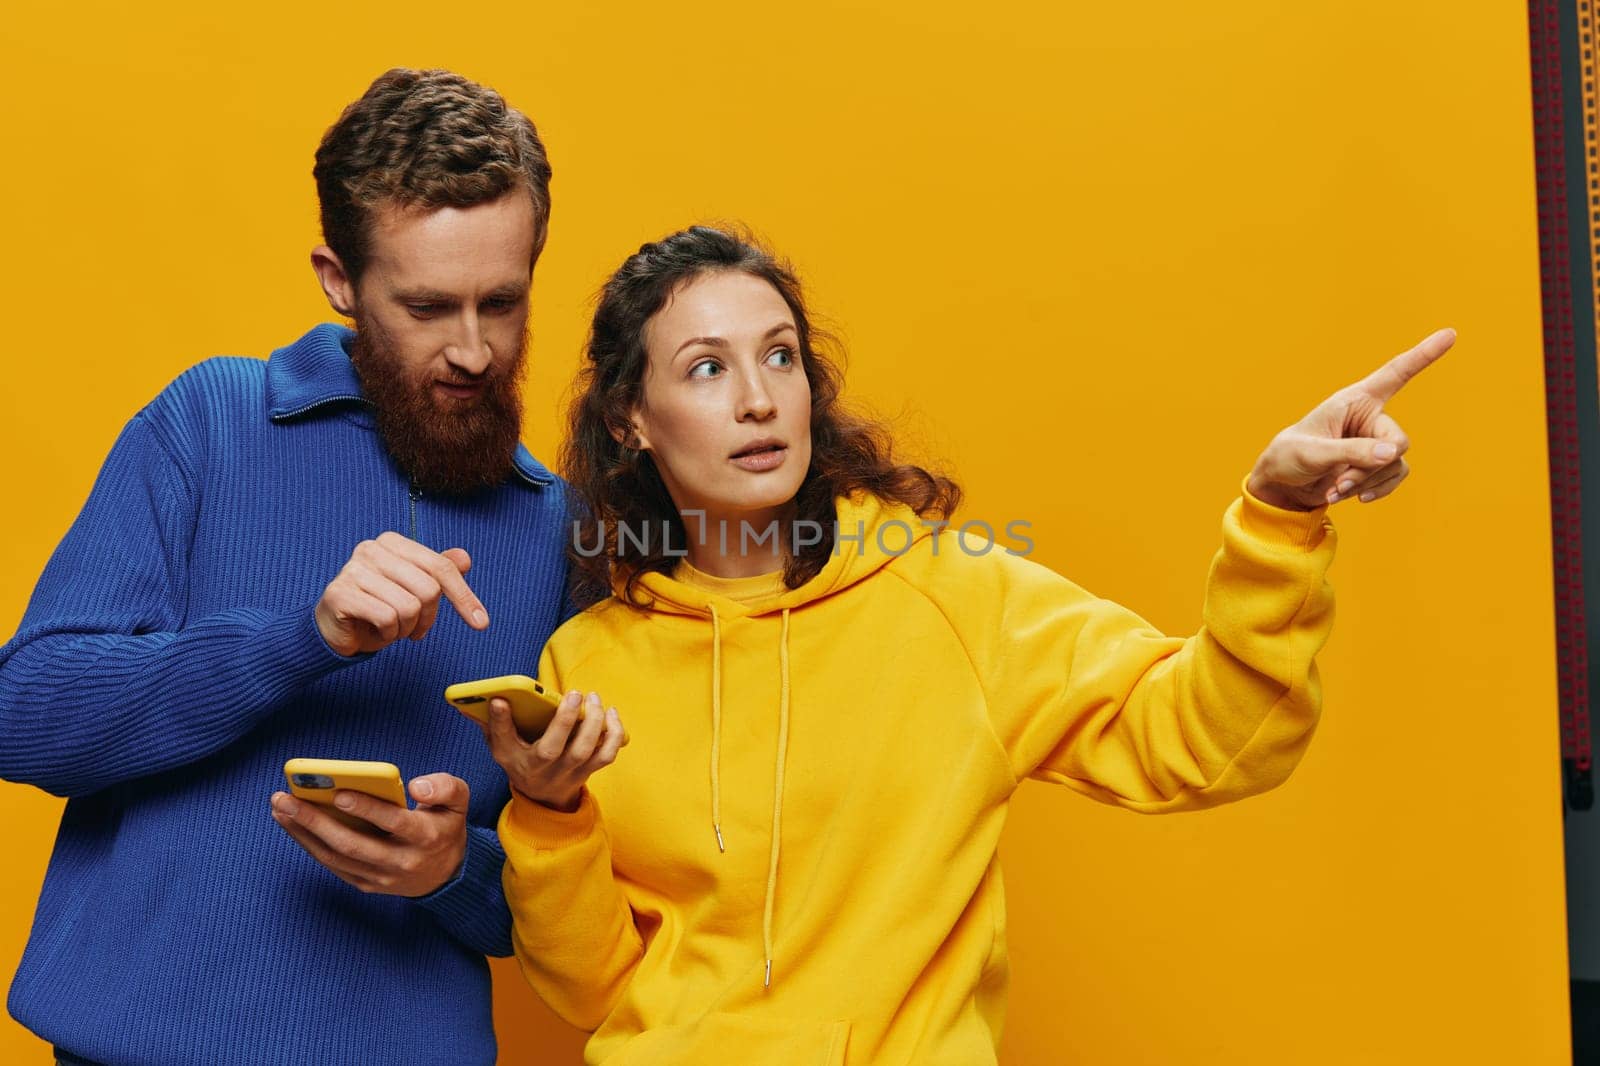 Woman and man cheerful couple with phones in hand social networking and communication crooked smile fun and fight, in yellow background. The concept of real family relationships, freelancers, work online. High quality photo